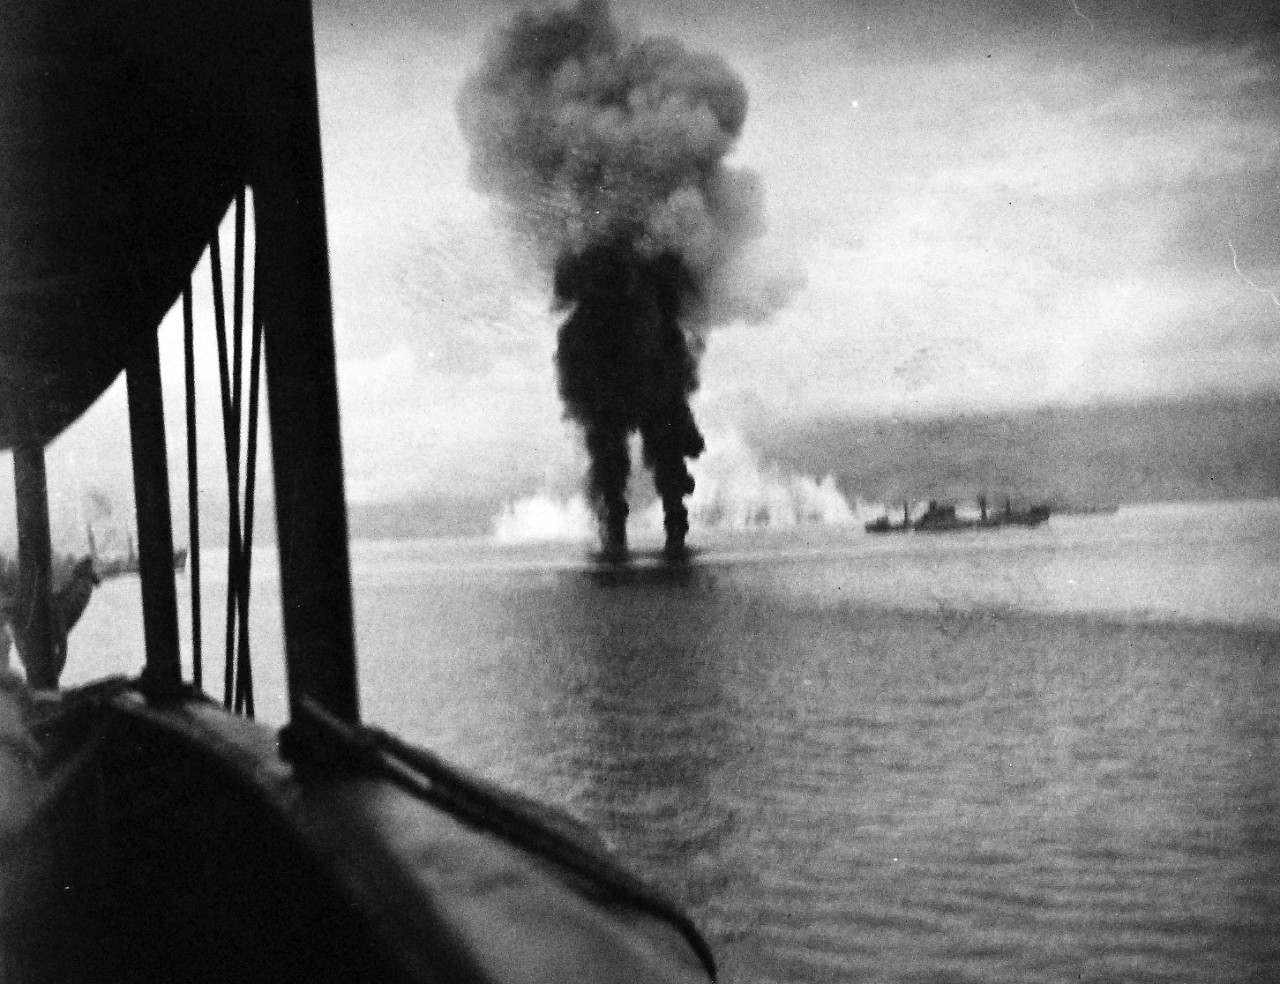 80-G-32367:  Naval Battle of Guadalcanal, 12-15 November 1942.  Smoke rises from two enemy planes shot down during a Japanese air attack on U.S. ships off Guadalcanal, 12 November 1942. Photographed from USS President Adams (AP-38).  Ship at right is USS Betelgeuse (AK-28). That at left, barely visible beyond President Adams' structure, is USS Libra (AK-53). Smoke in the center distance appears to be a smoke screen. Official U.S. Navy Photograph, now in the collections of the National Archives.. (2016/05/17).